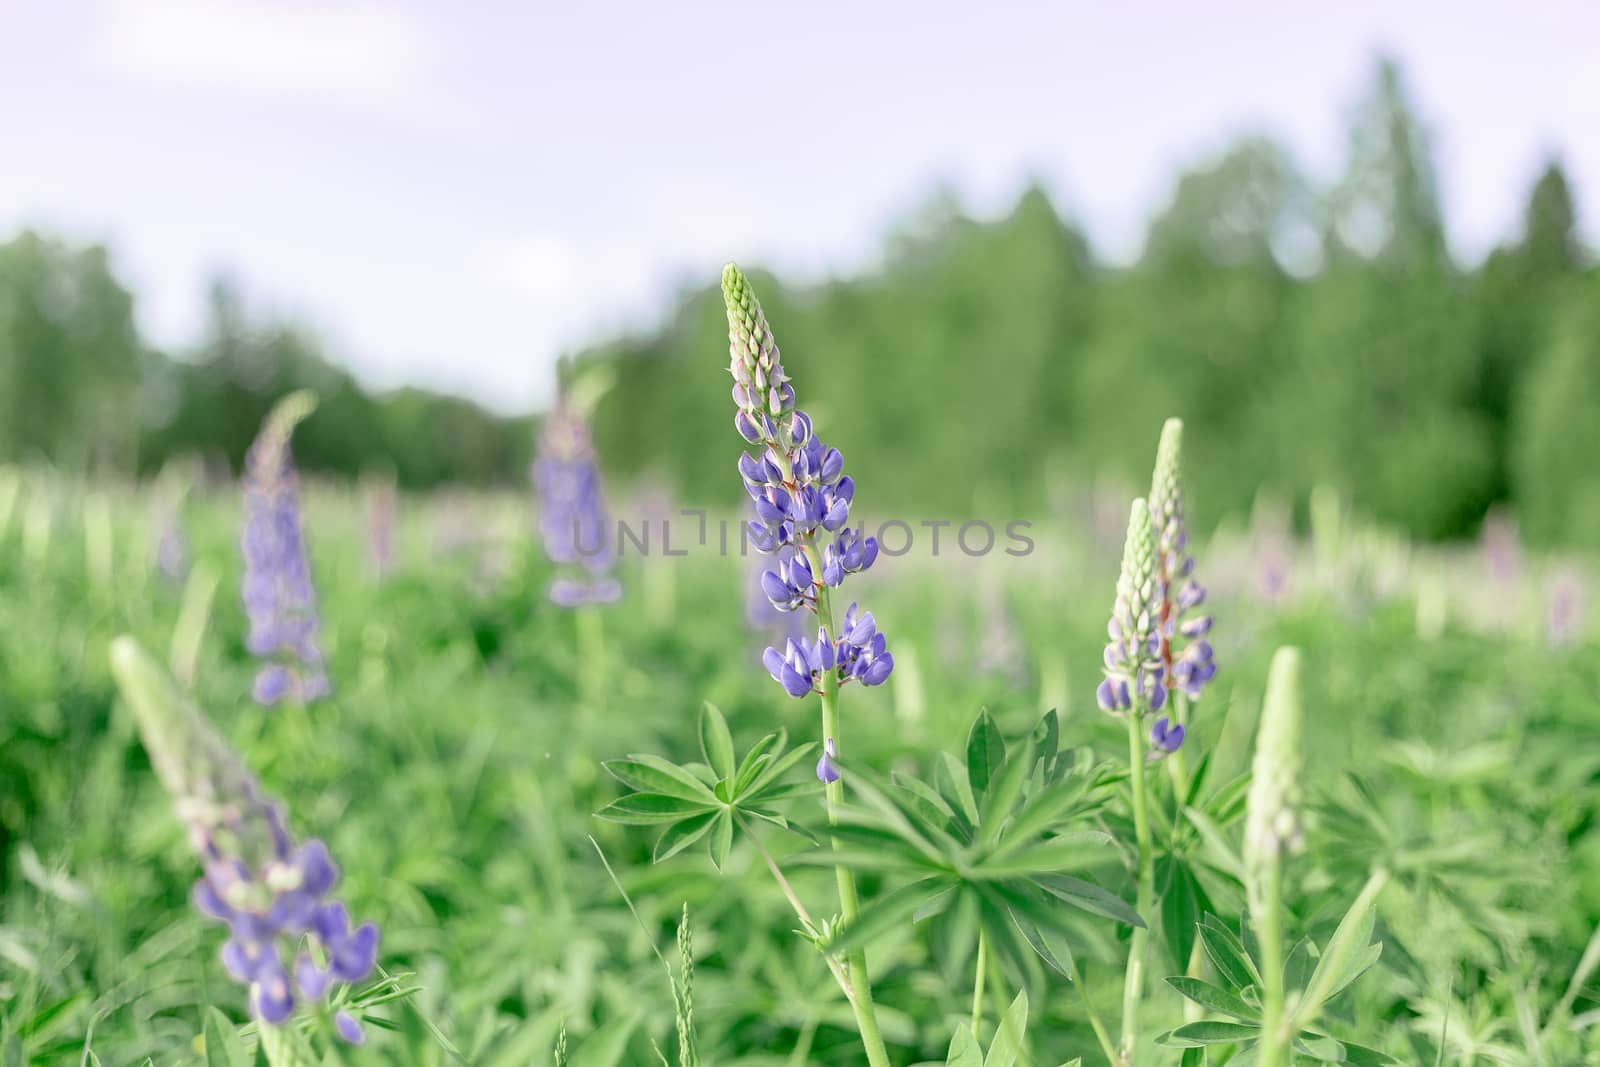 Lupin field with pink purple flowers. Bunch of lupines summer flower background. Blooming lupine flowers. field of lupines. Sunlight shines on plants. spring and summer flowers. Gentle warm soft color